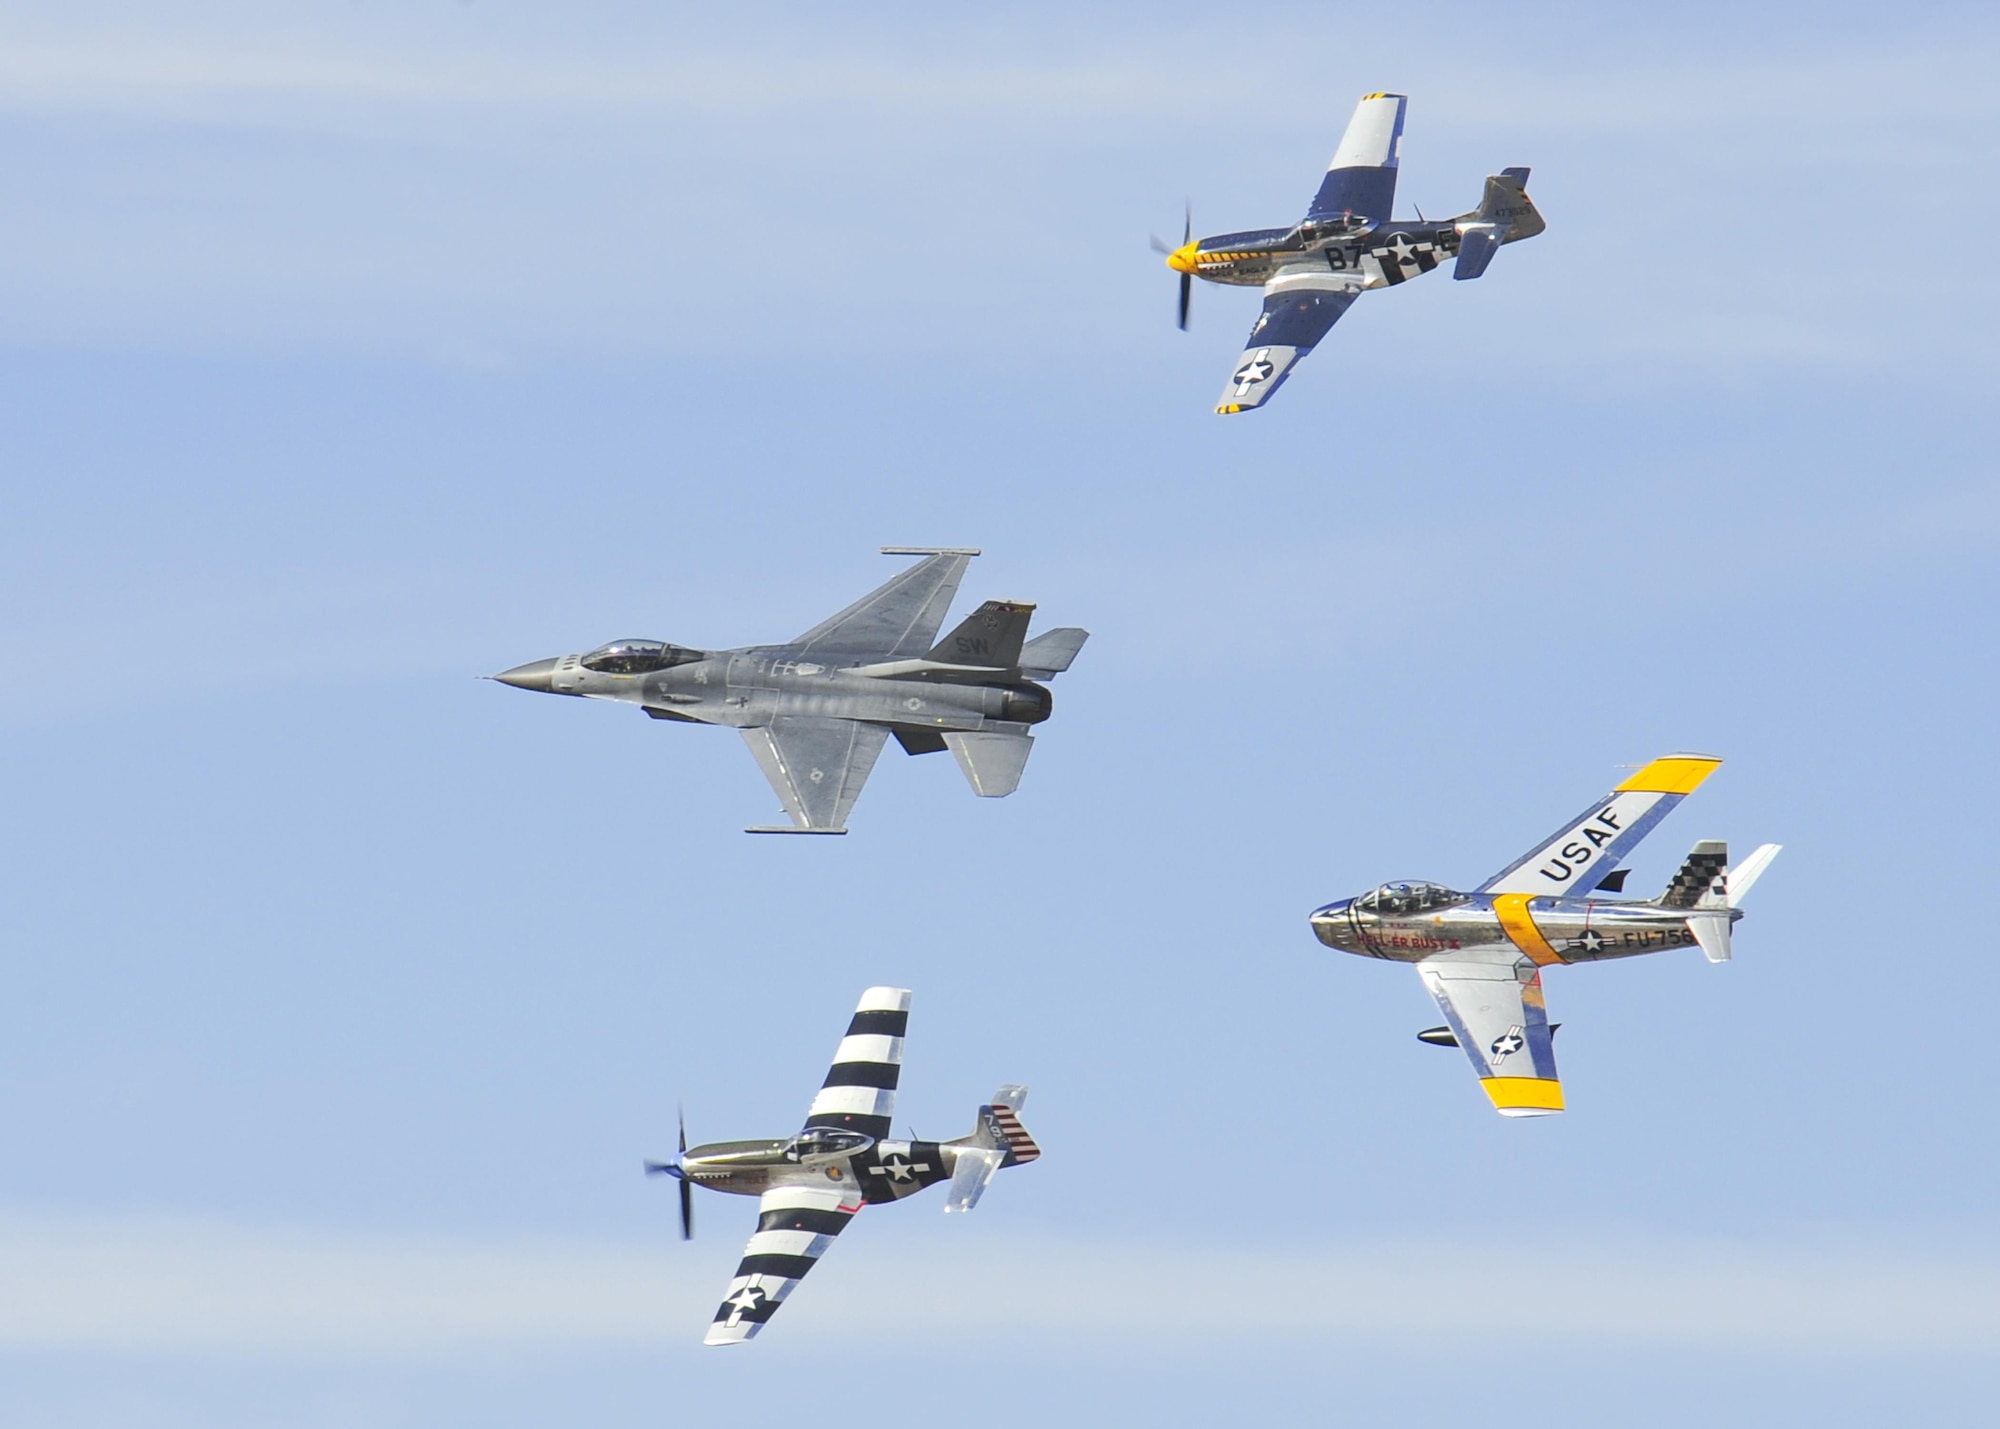 A U.S. Air Force F-16 Fighting Falcon, front, leads a formation followed by two P-51 Mustangs, top and bottom, and an F-86 Sabre, rear, during the 2016 Heritage Flight Training and Certification Course at Davis-Monthan Air Force Base, Ariz., March 4, 2016. Established in 1997, the HFTCC certifies civilian pilots of historic military aircraft and U.S. Air Force pilots to fly in formation together during the upcoming air show season. (U.S. Air Force photo by Senior Airman Chris Massey/Released)